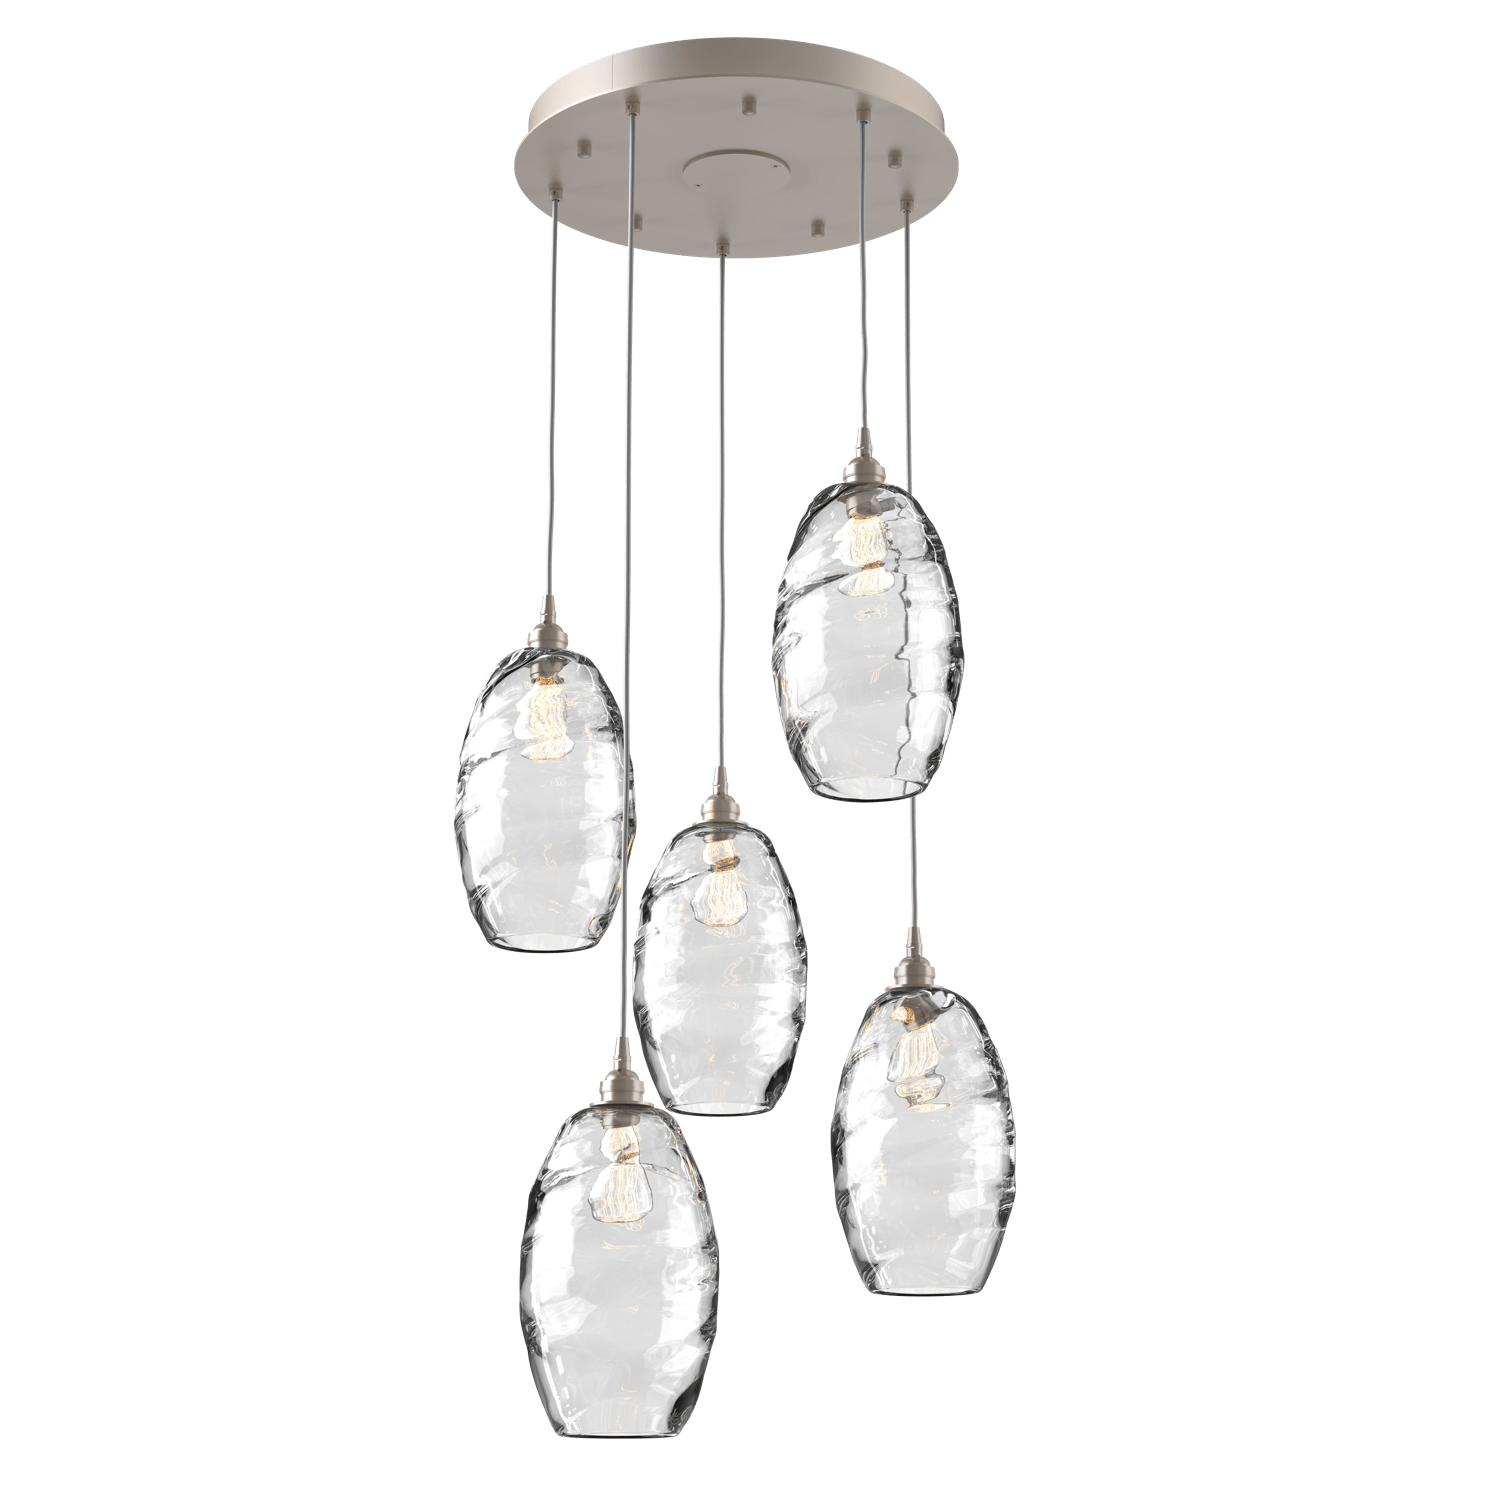 CHB0035-05-BS-OC-Hammerton-Studio-Optic-Blown-Glass-Elisse-5-light-round-pendant-chandelier-with-metallic-beige-silver-finish-and-optic-clear-blown-glass-shades-and-incandescent-lamping